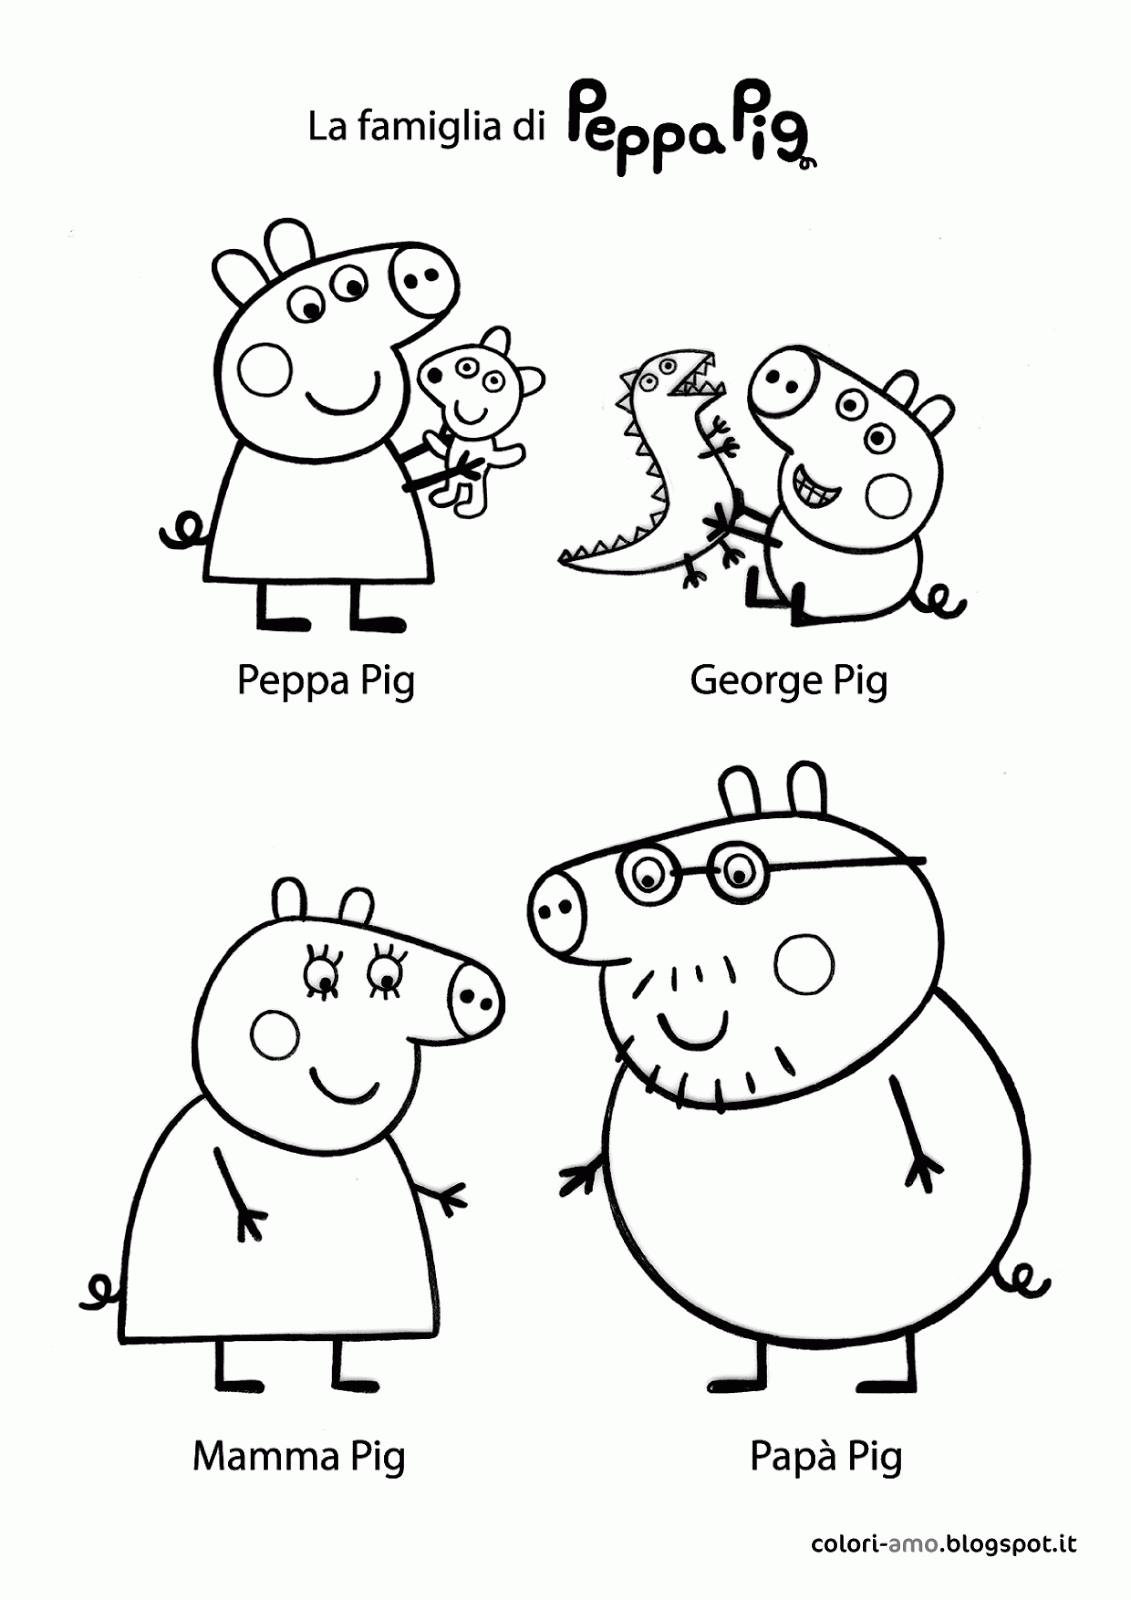 Free Peppa Pig And Friends Coloring Pages Print, Download Free Peppa